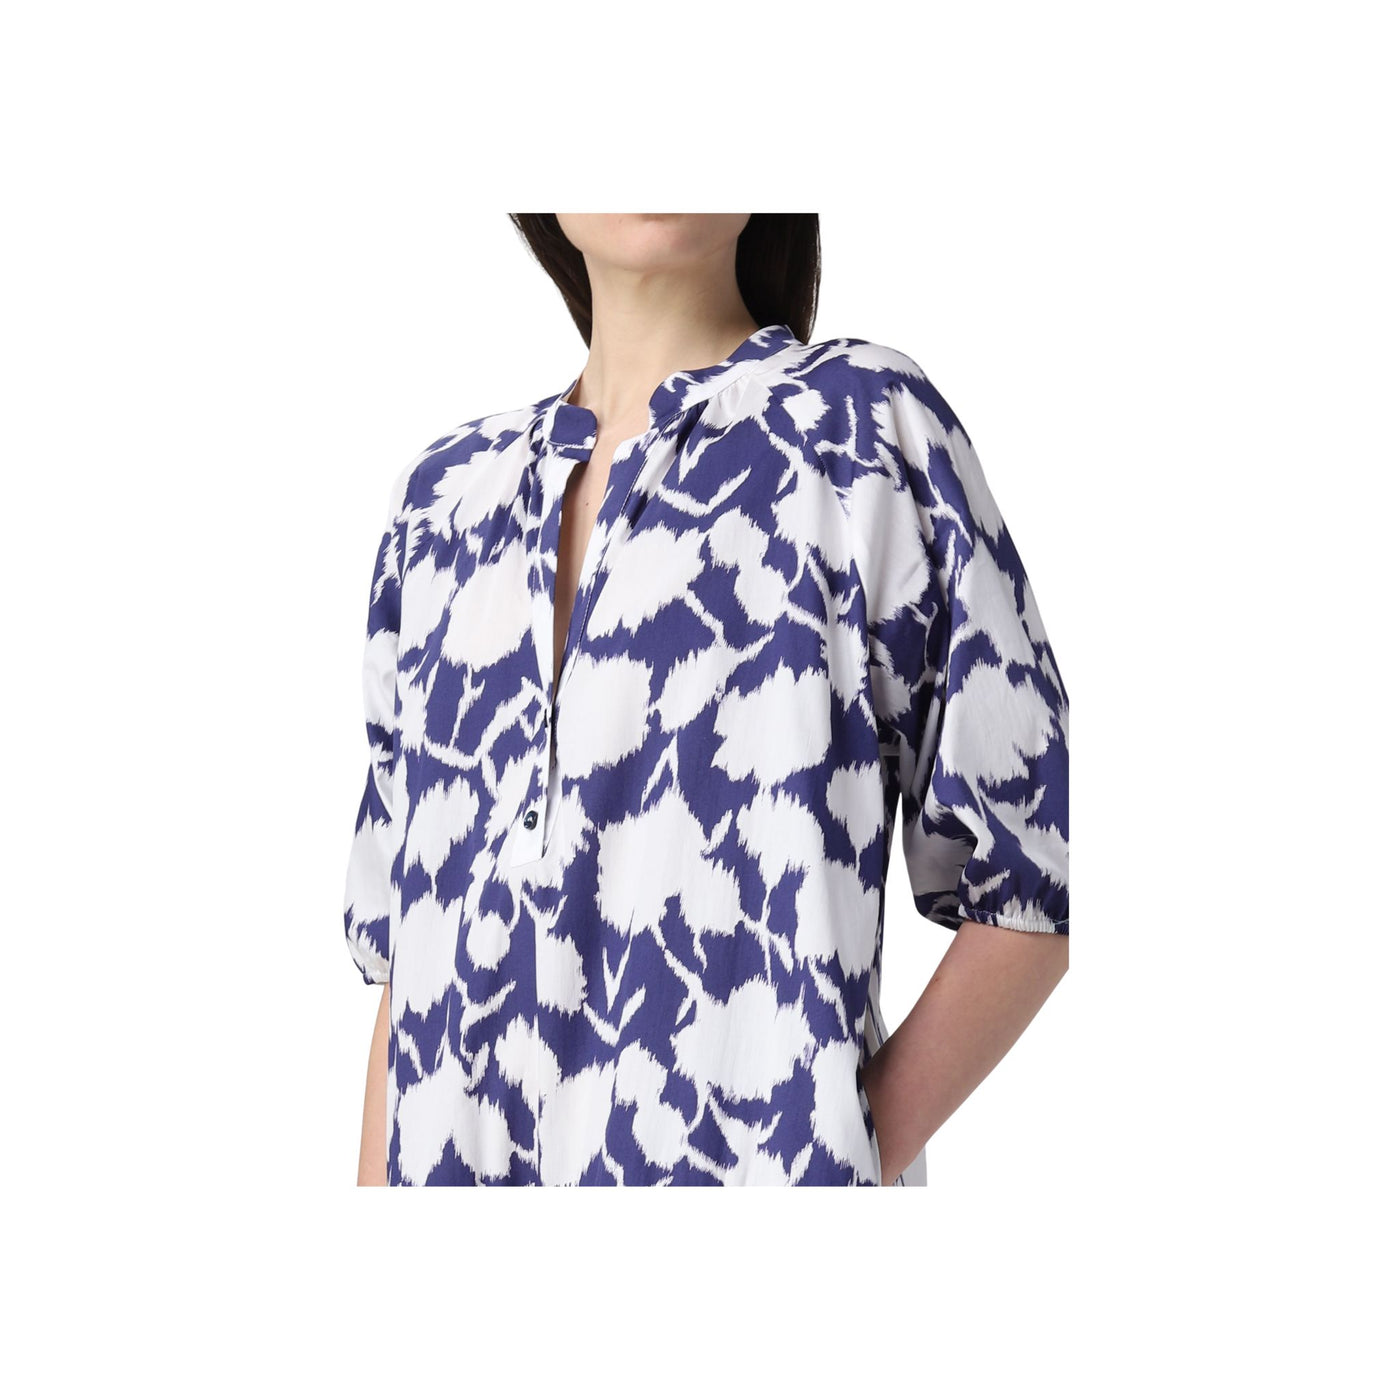 Women's dress with floral pattern